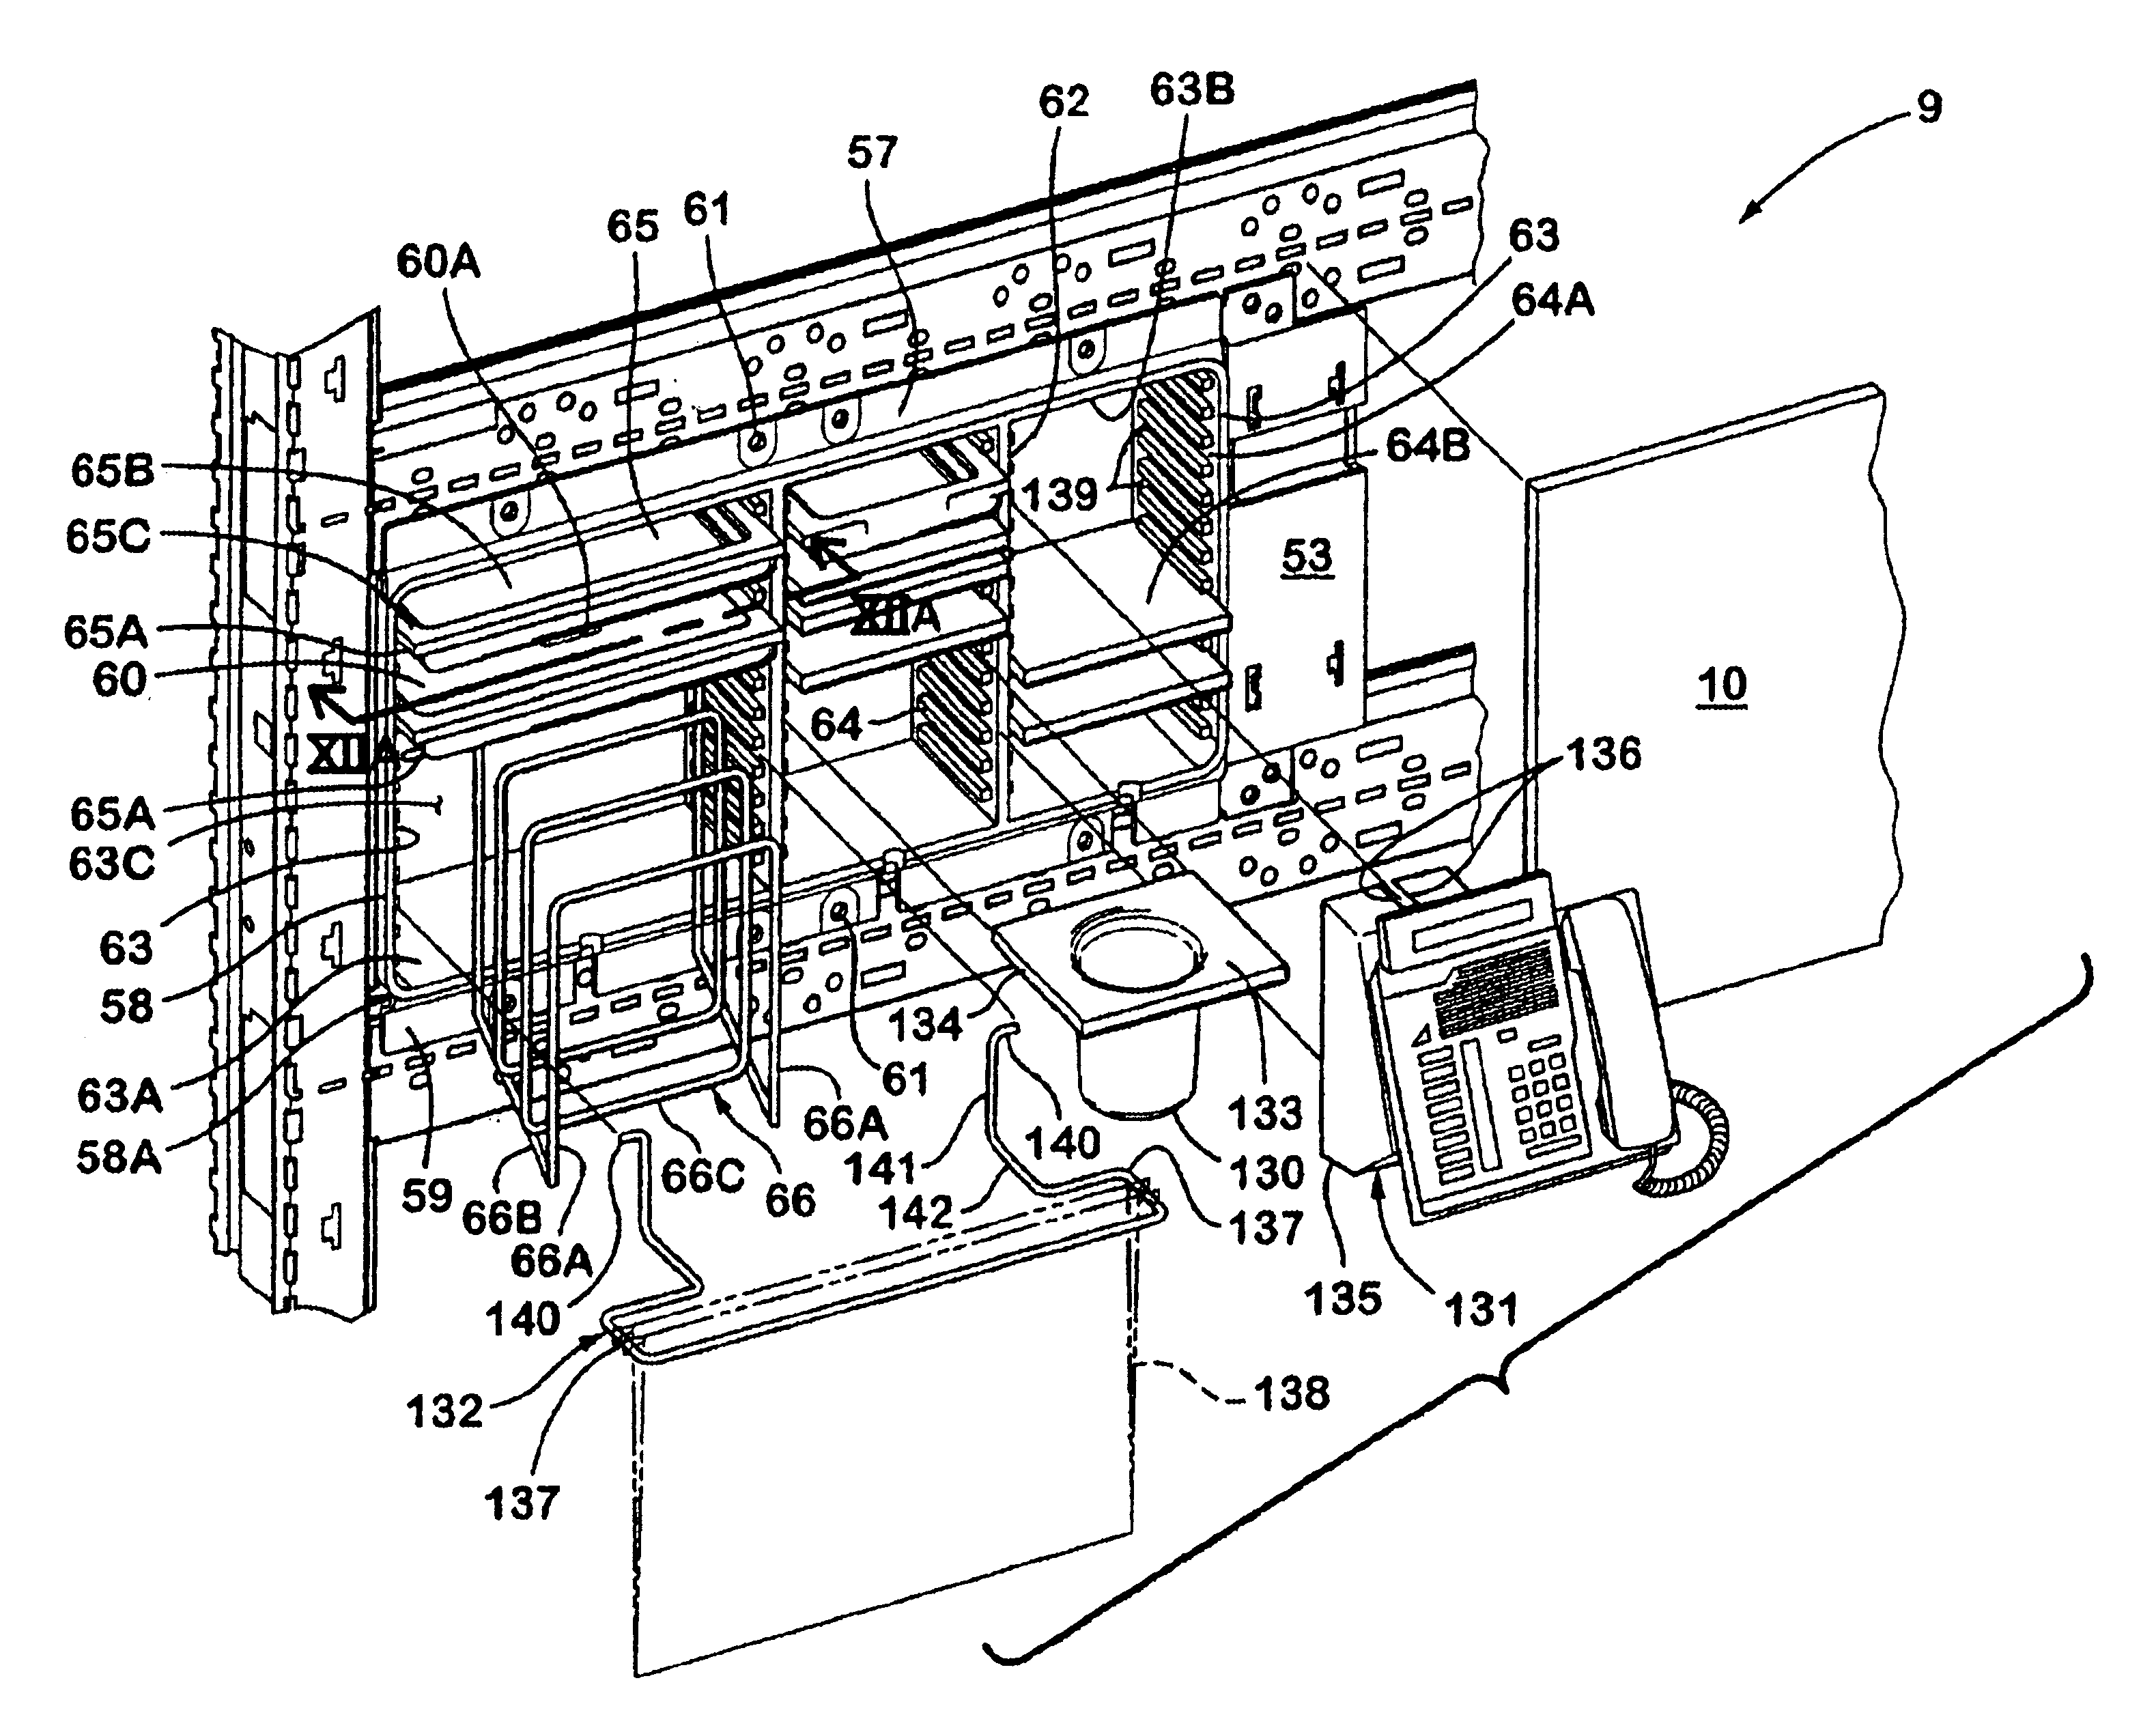 Partition panel with modular appliance mounting arrangement